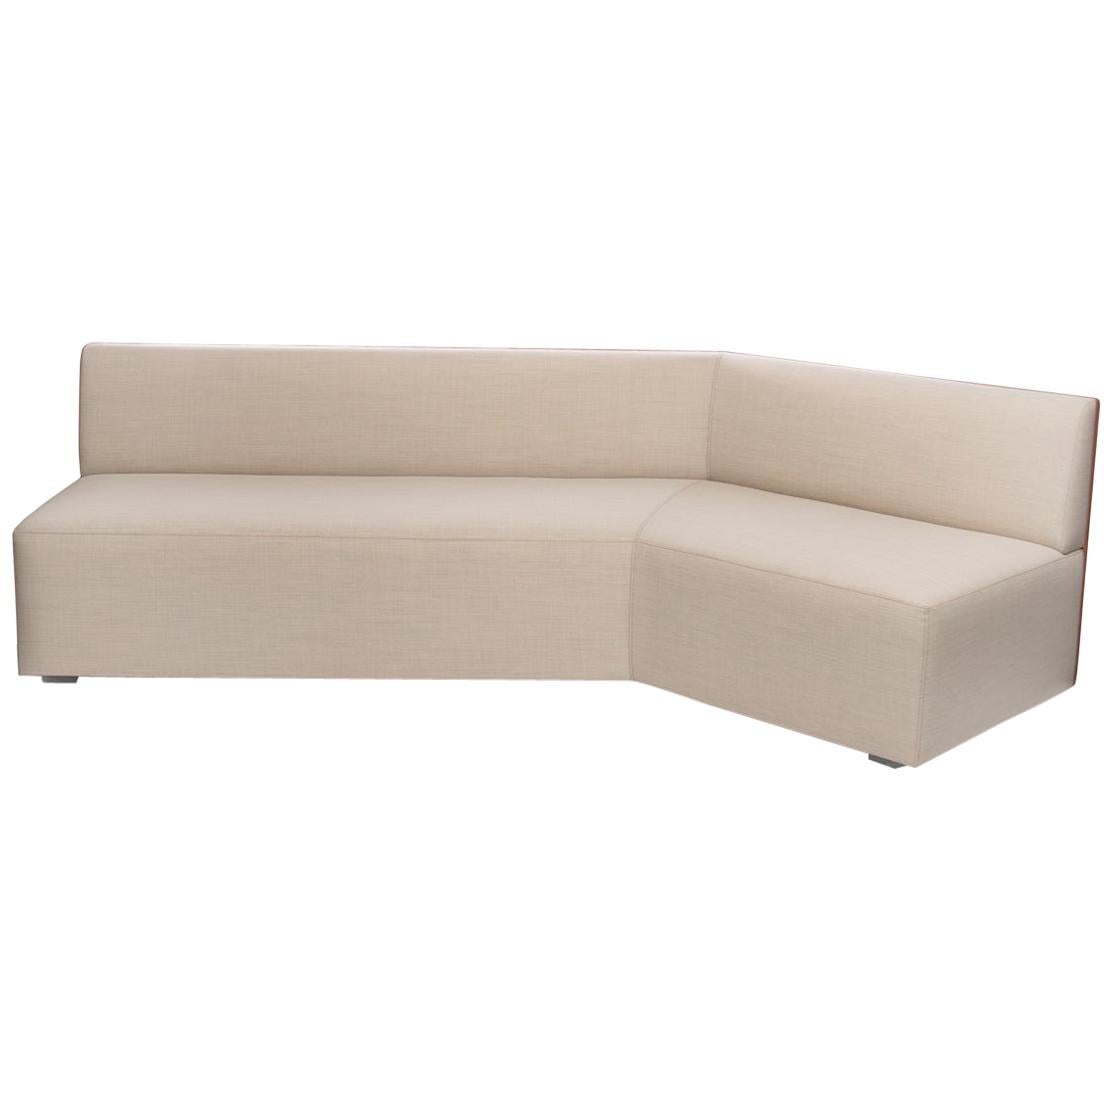 Sofa in Beige Fabrics and Brown Leather by Vincent Le Bourdon Handmade For Sale